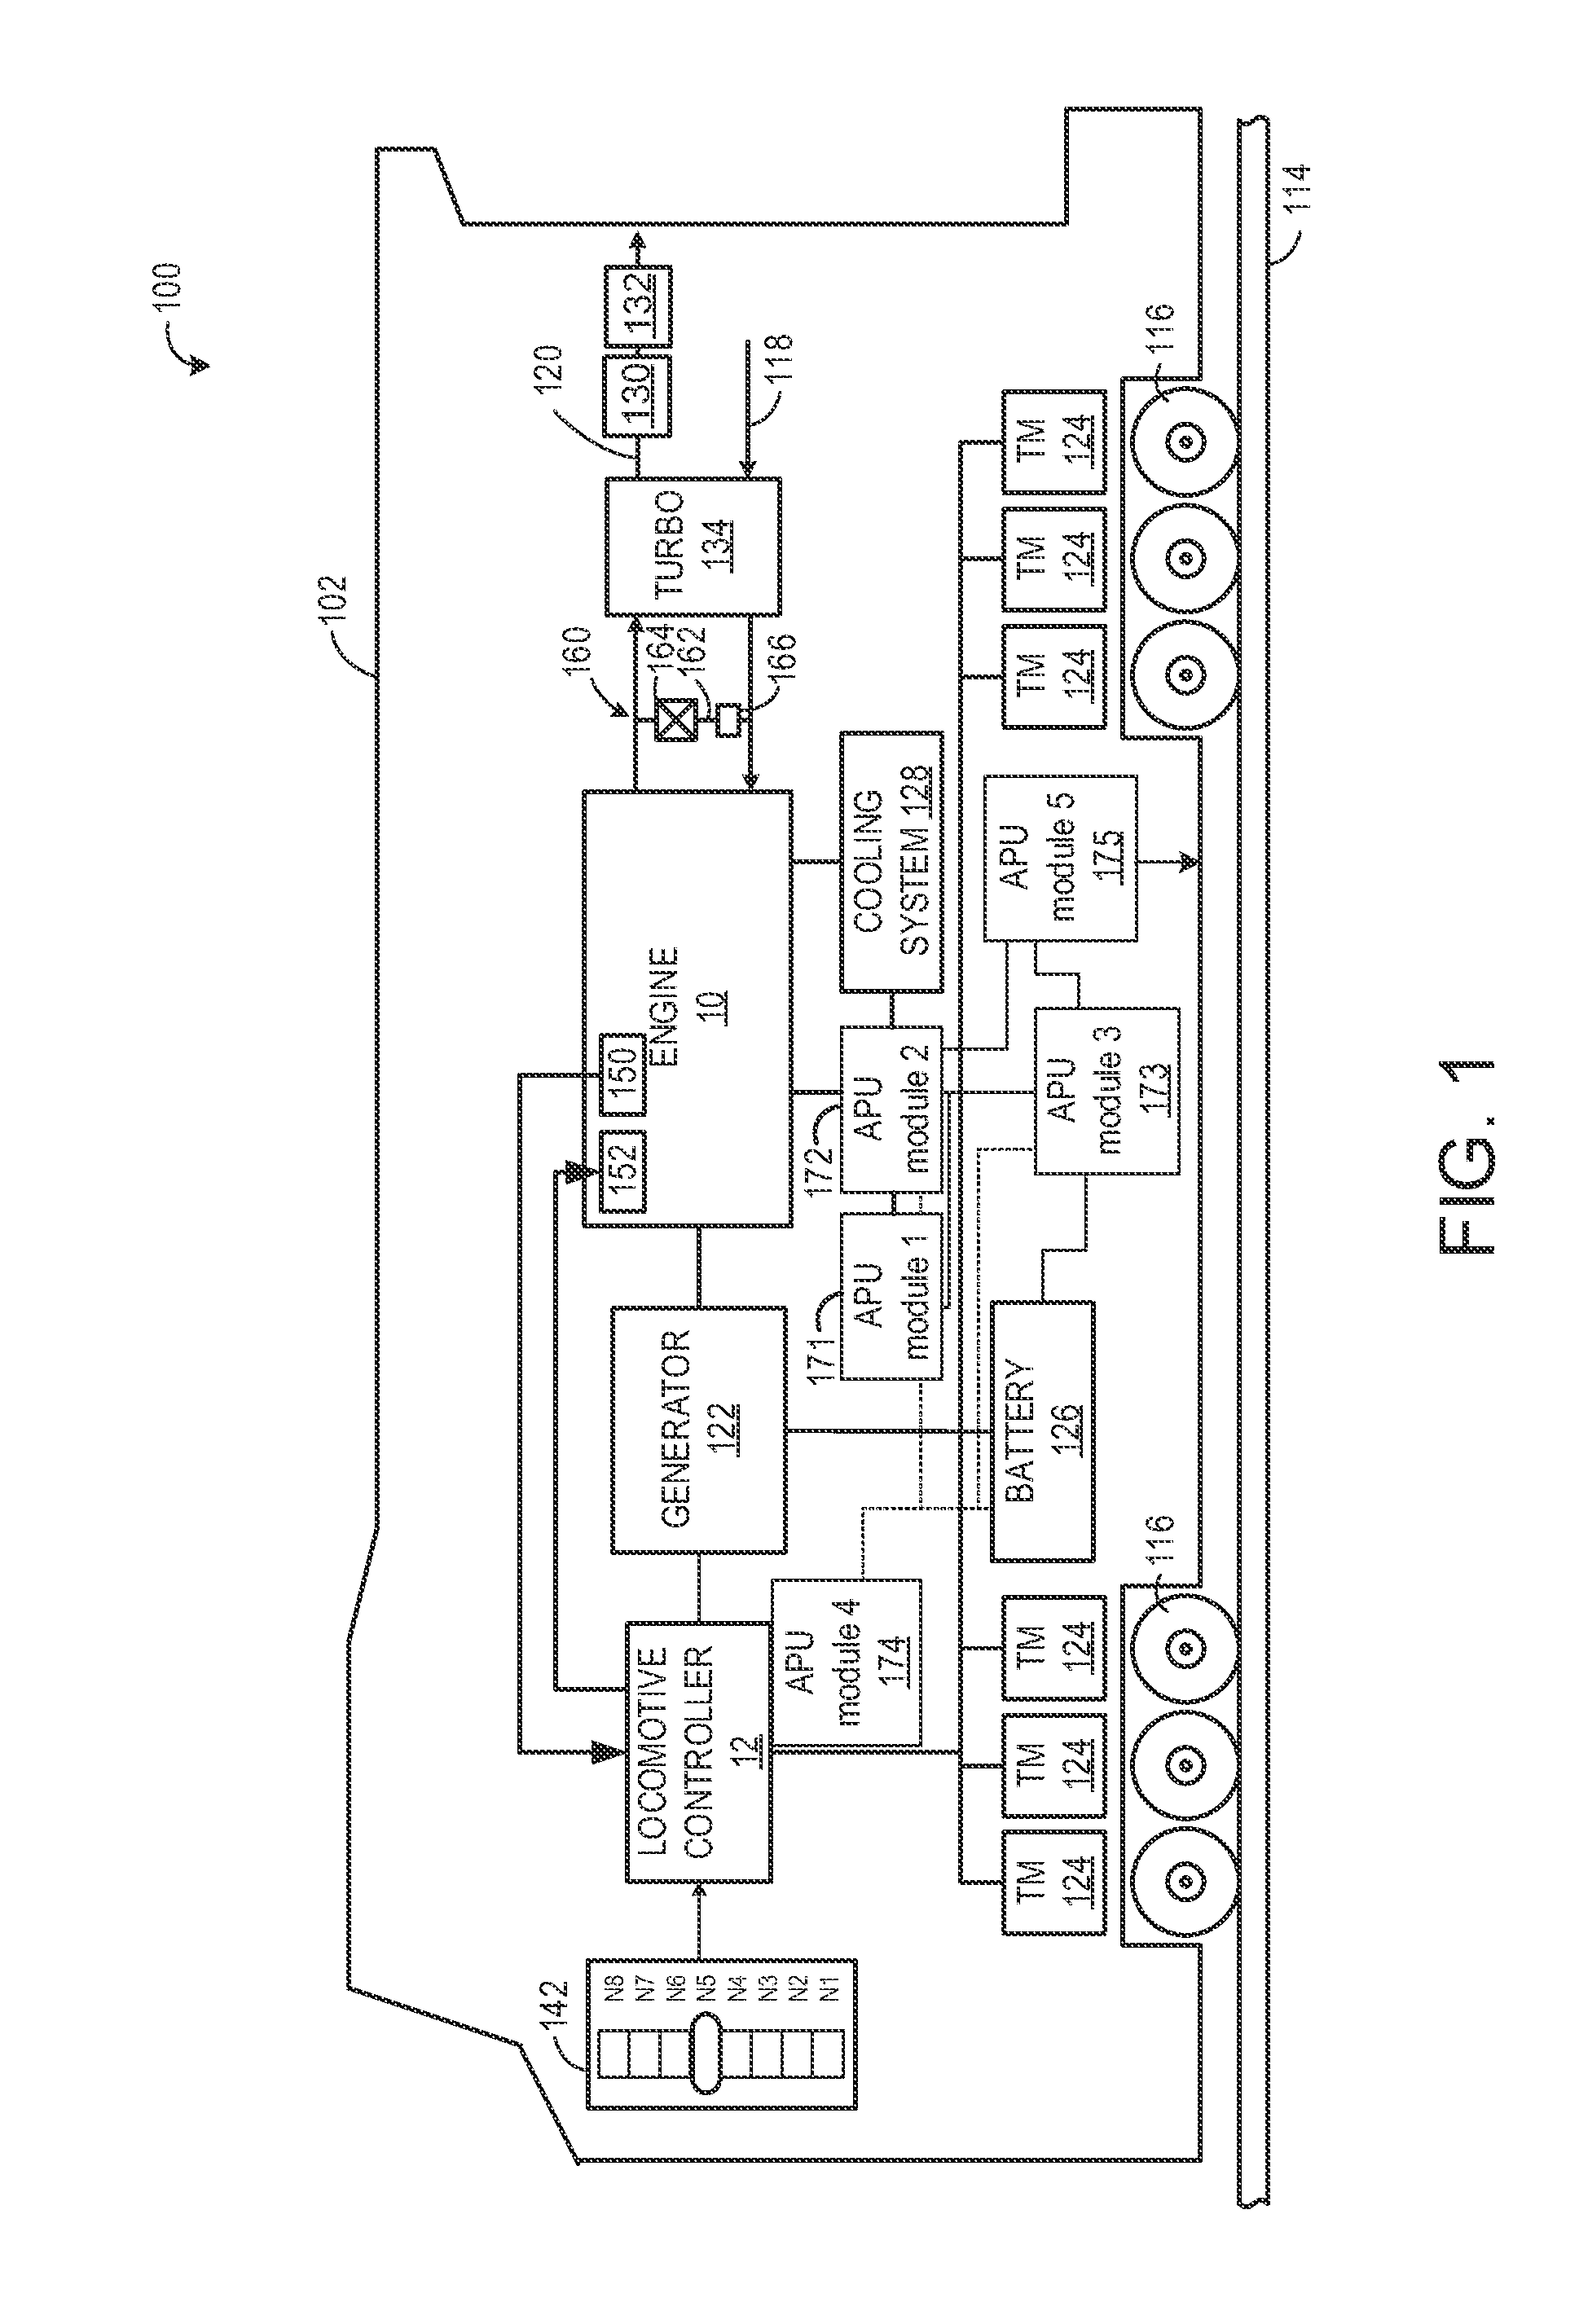 Distributed auxiliary power unit